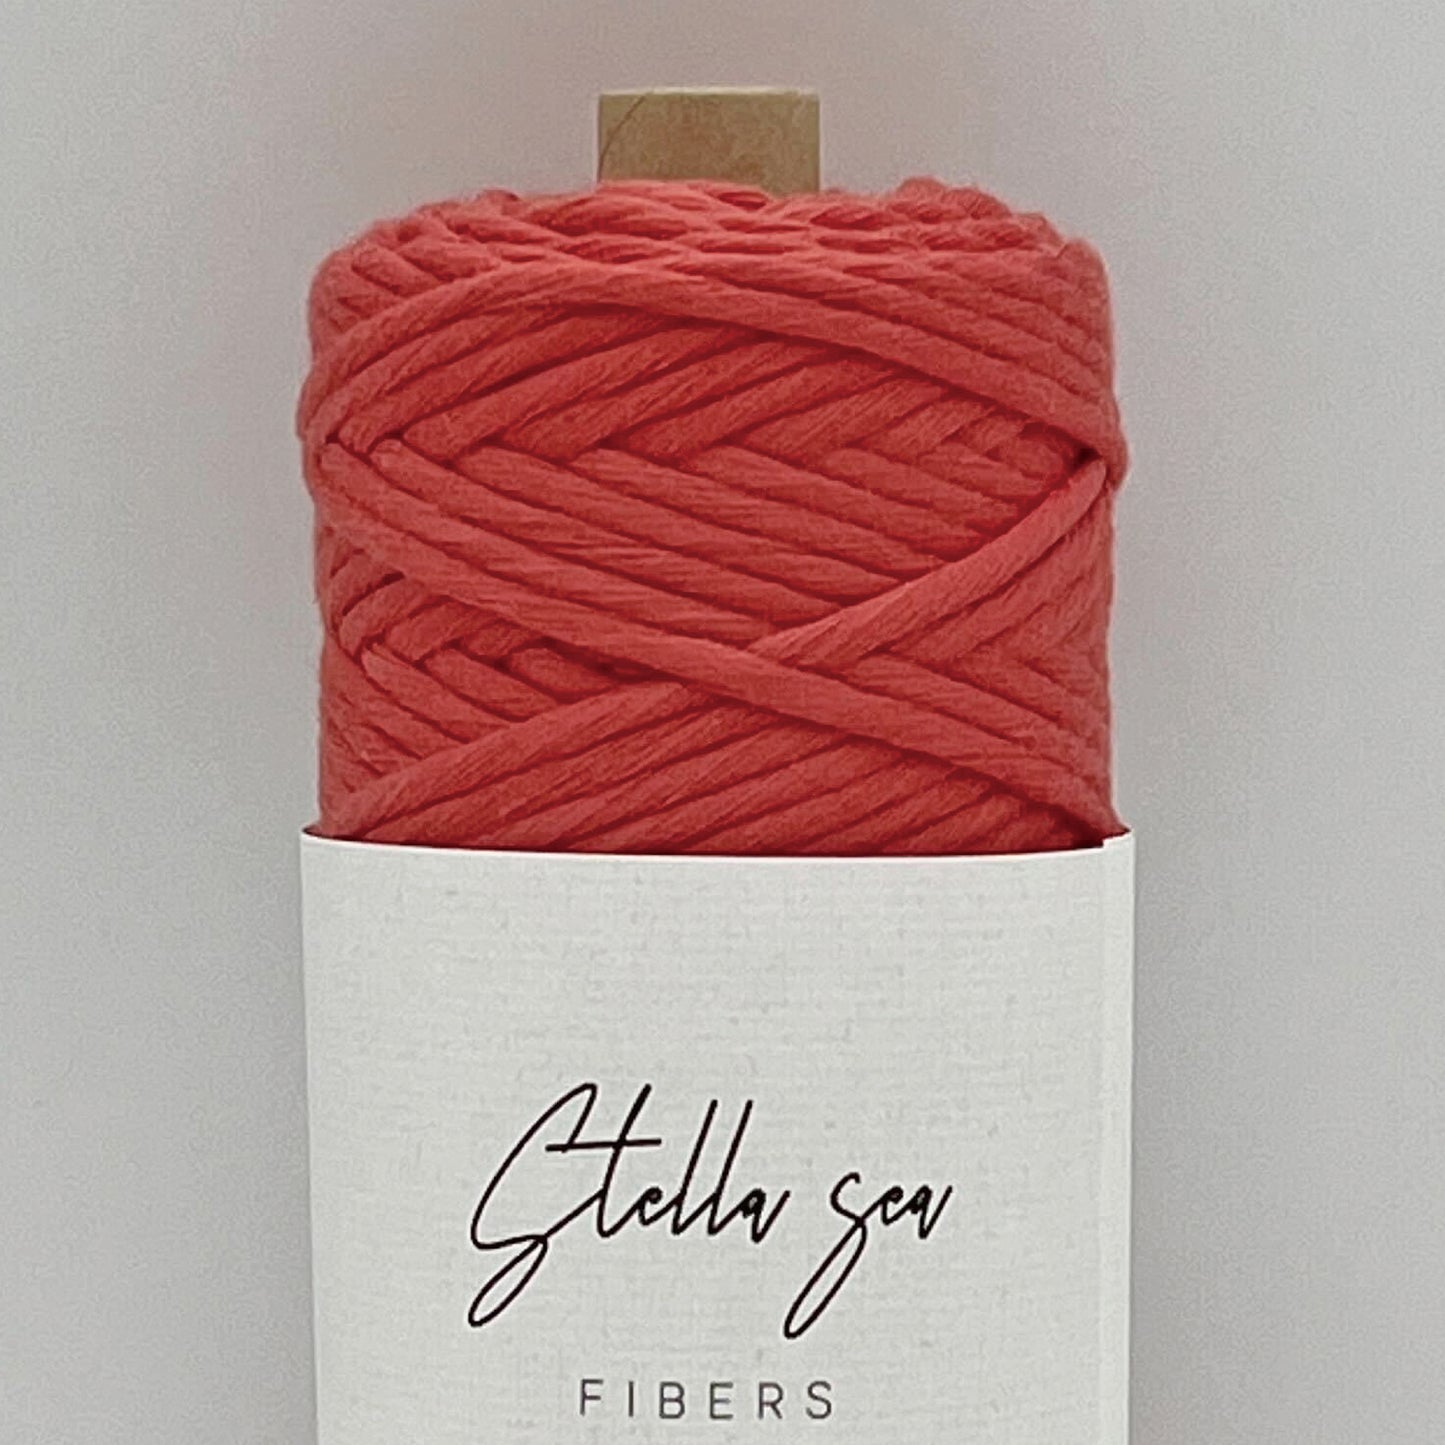 3.5mm/Color/100m (about 250g) Single-Strand fair trade organic cotton macrame color cord made in Japan